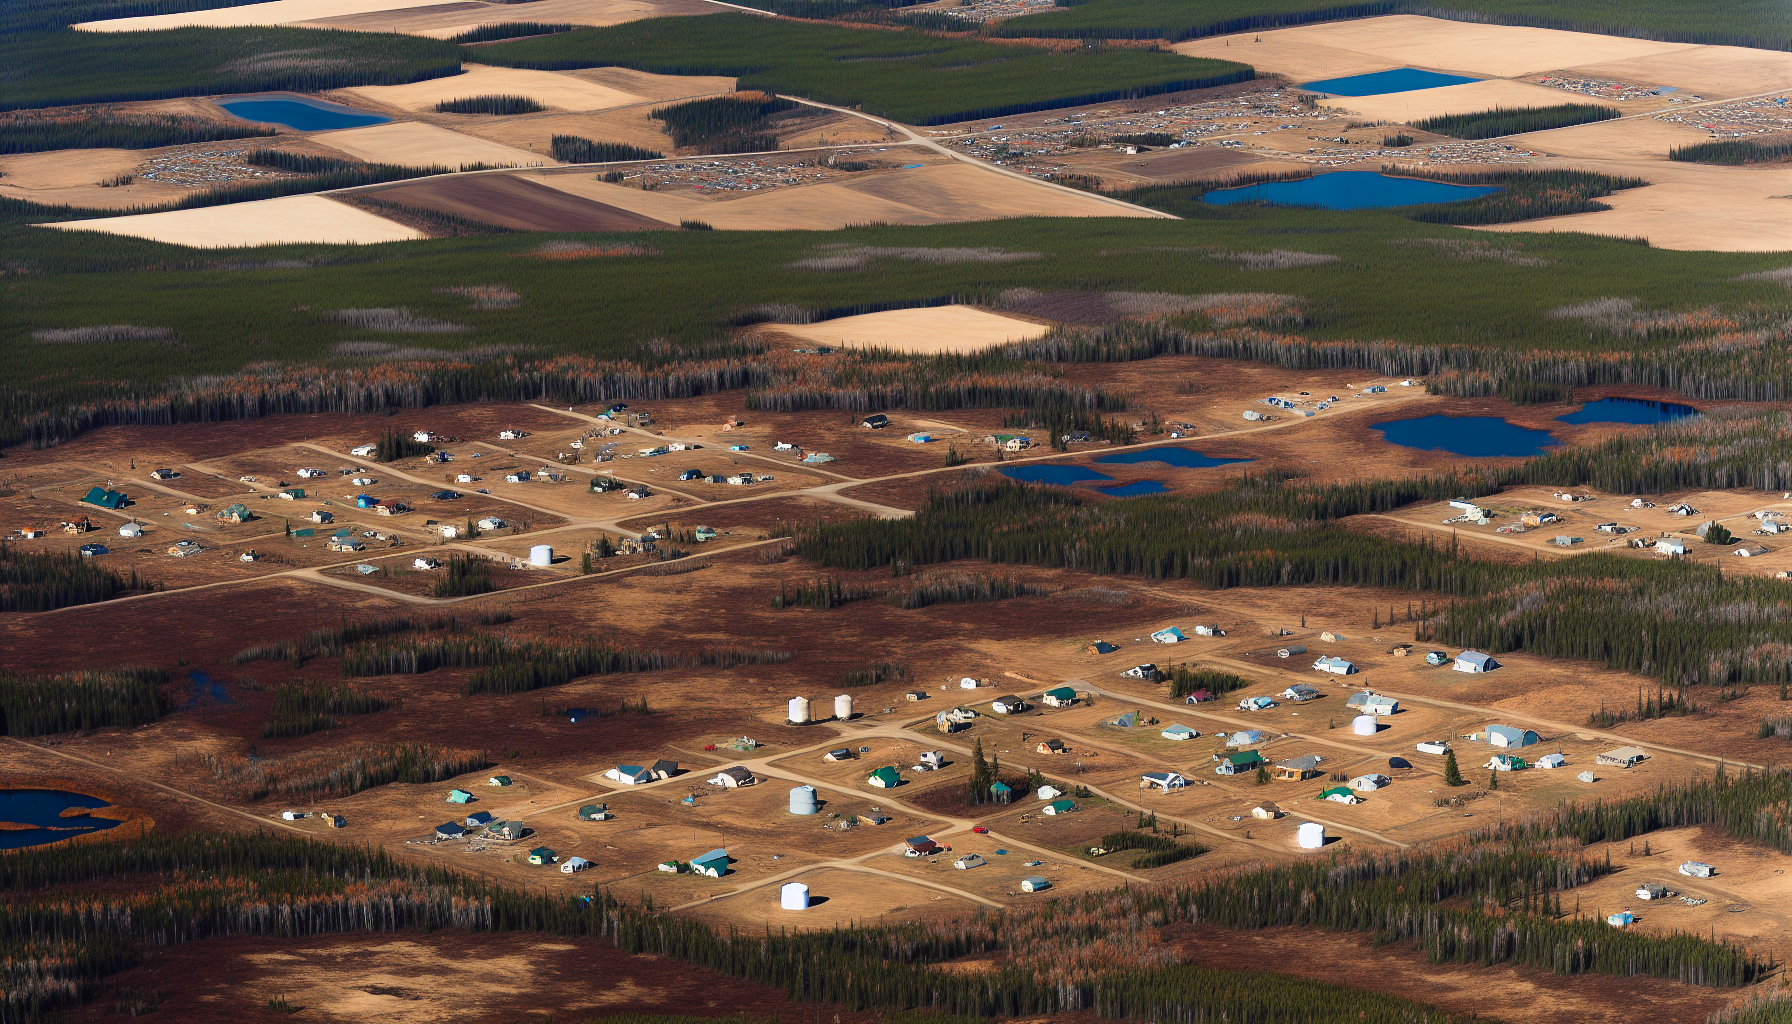 Aerial view of rural area in Alberta with septic systems